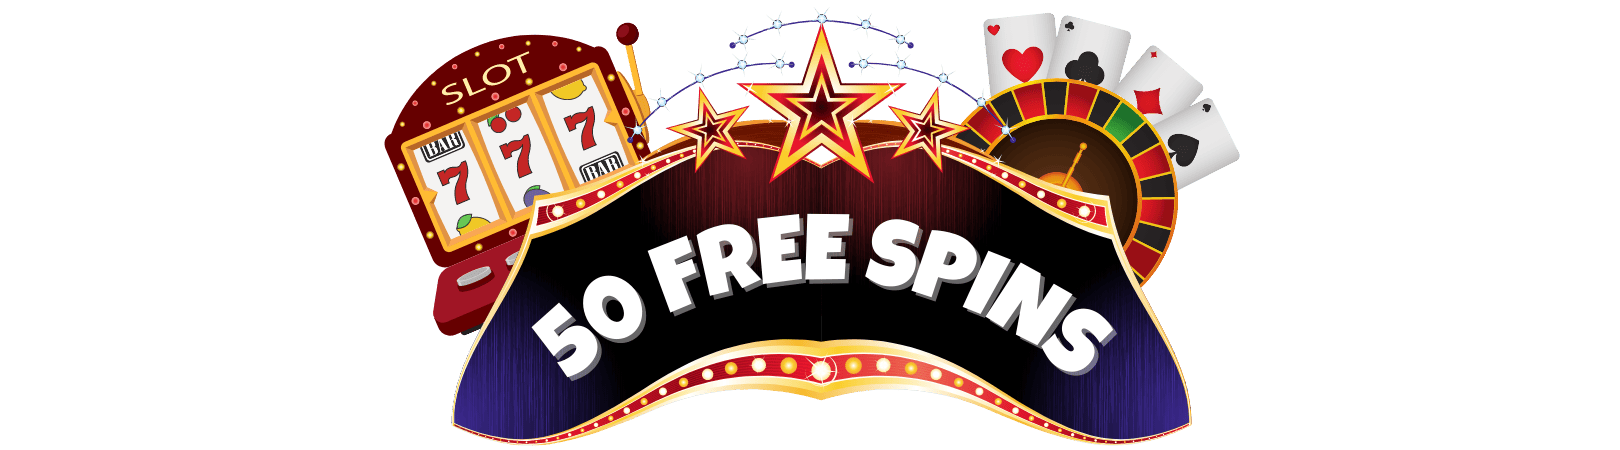 what is 50 free spins